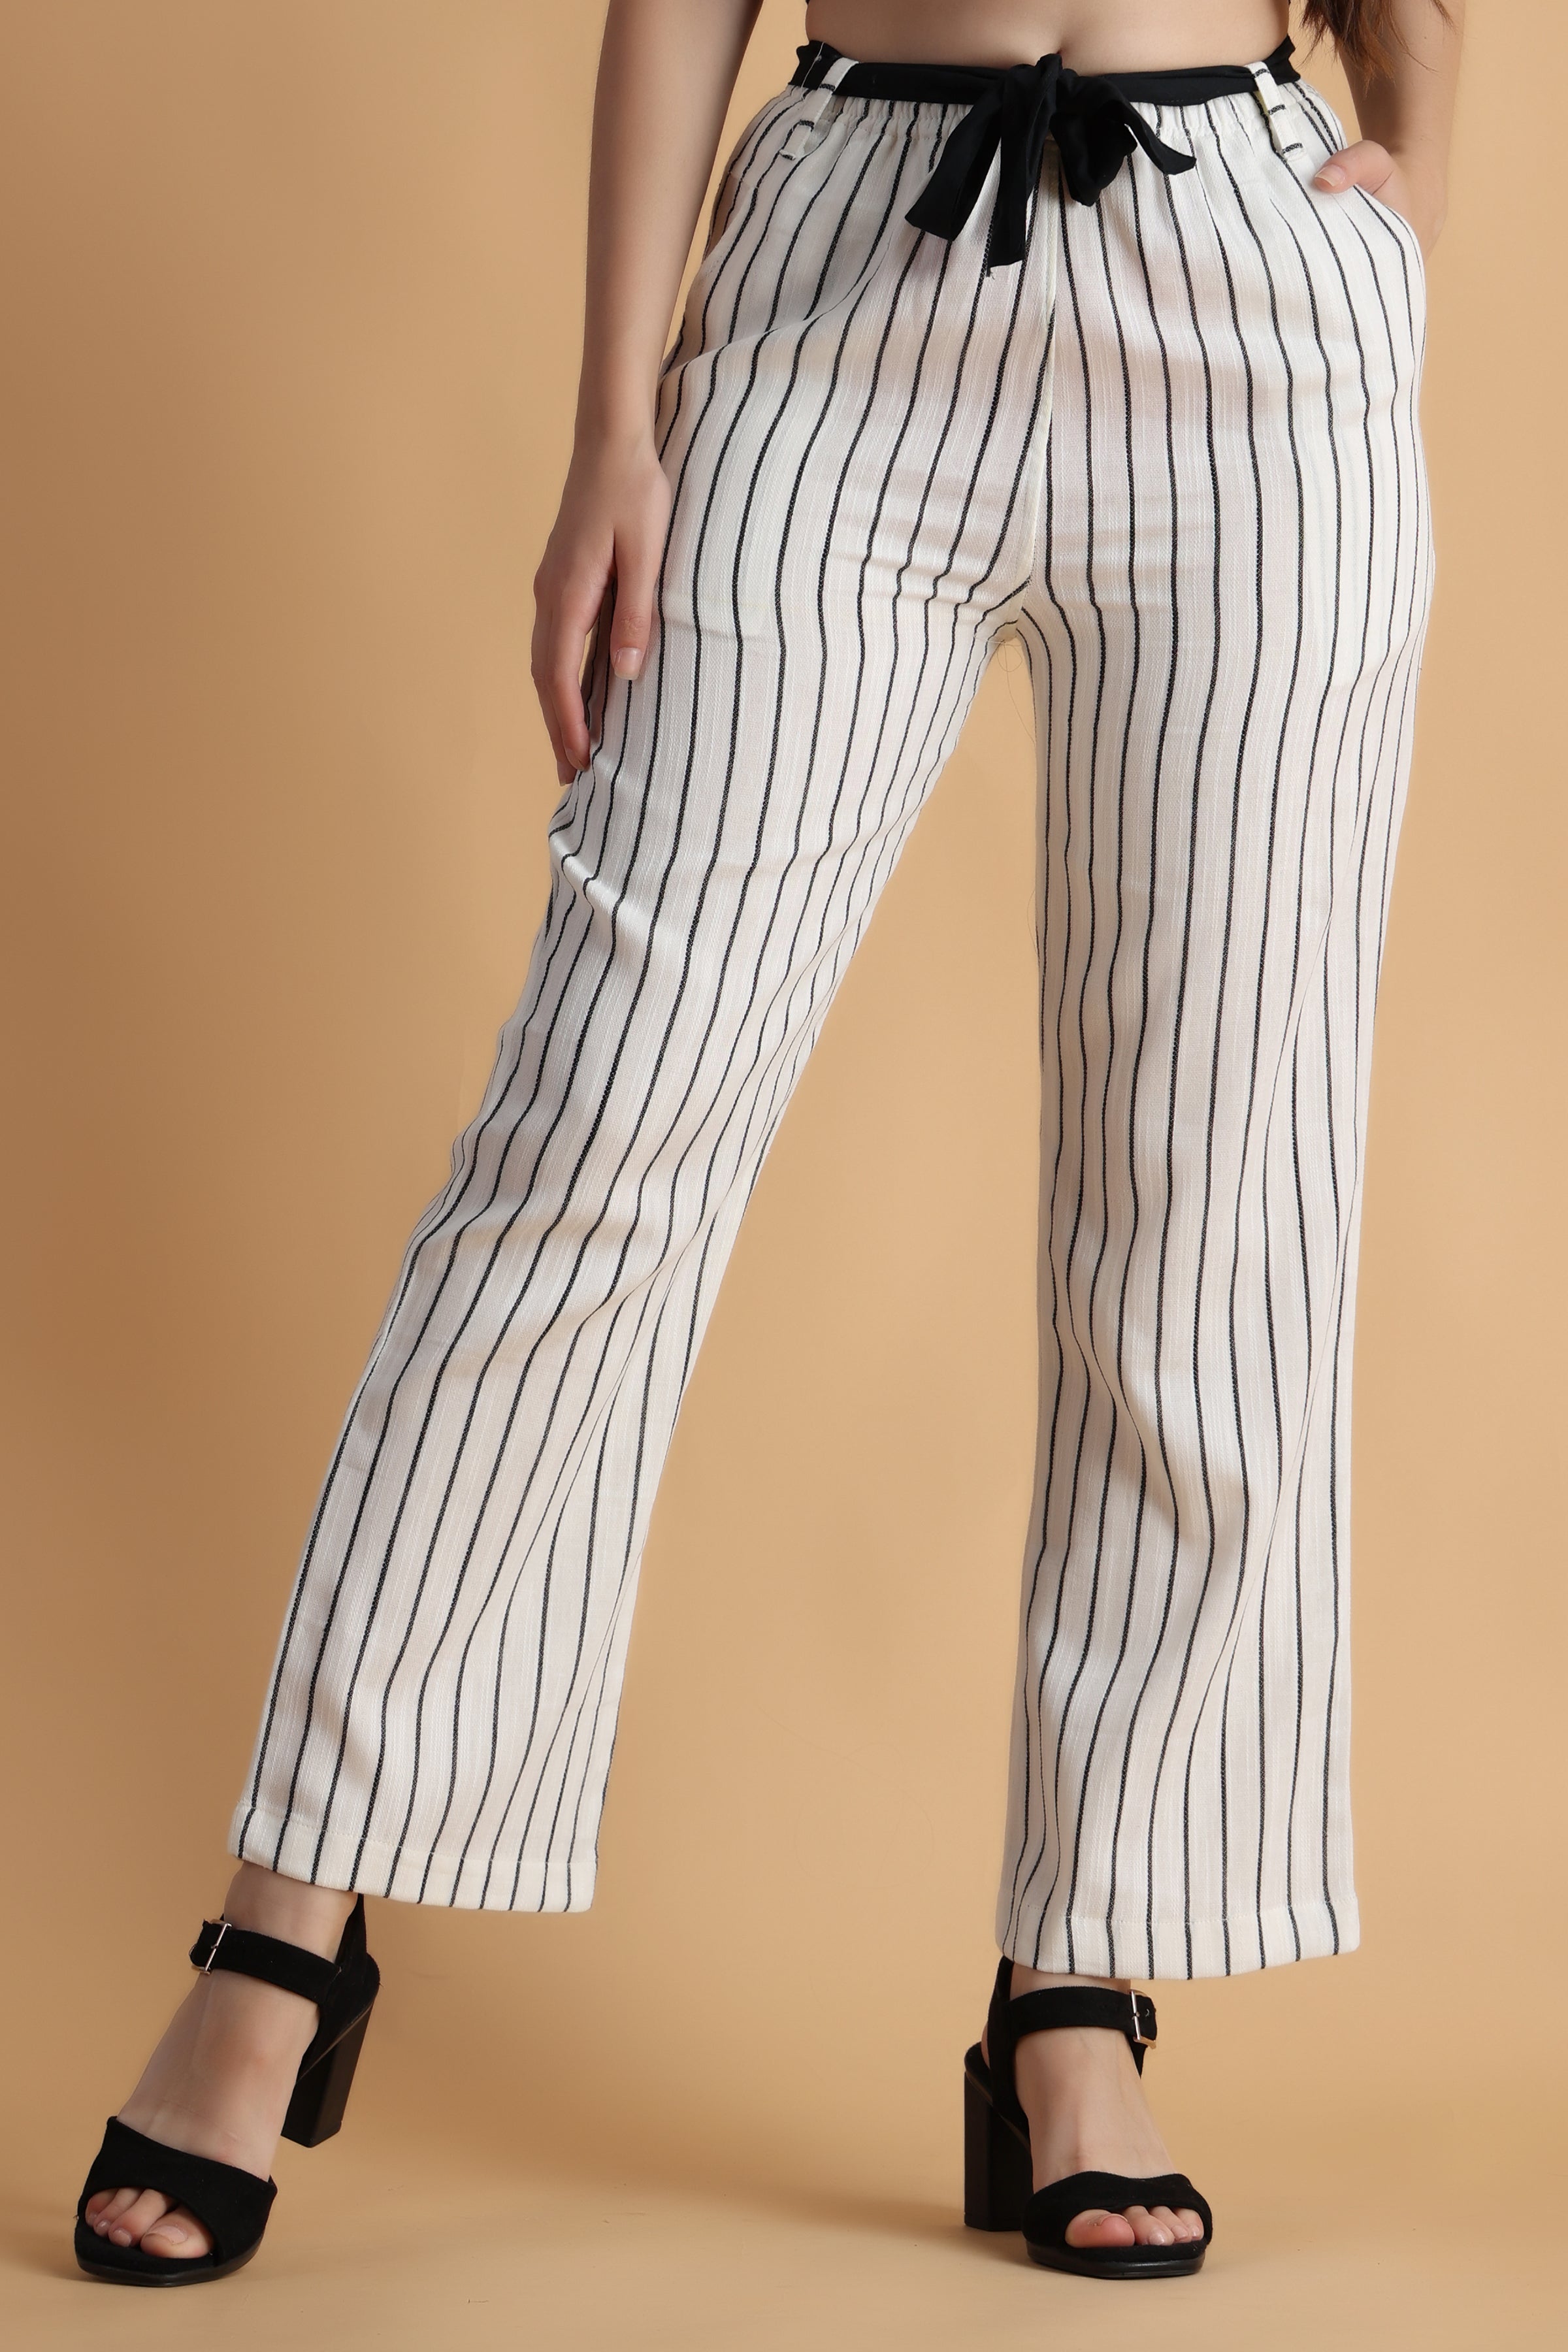 Forever 21 FOREVER 21+ Striped Palazzo Pants | Stripe pants outfit, Striped  palazzo pants, Palazzo pants